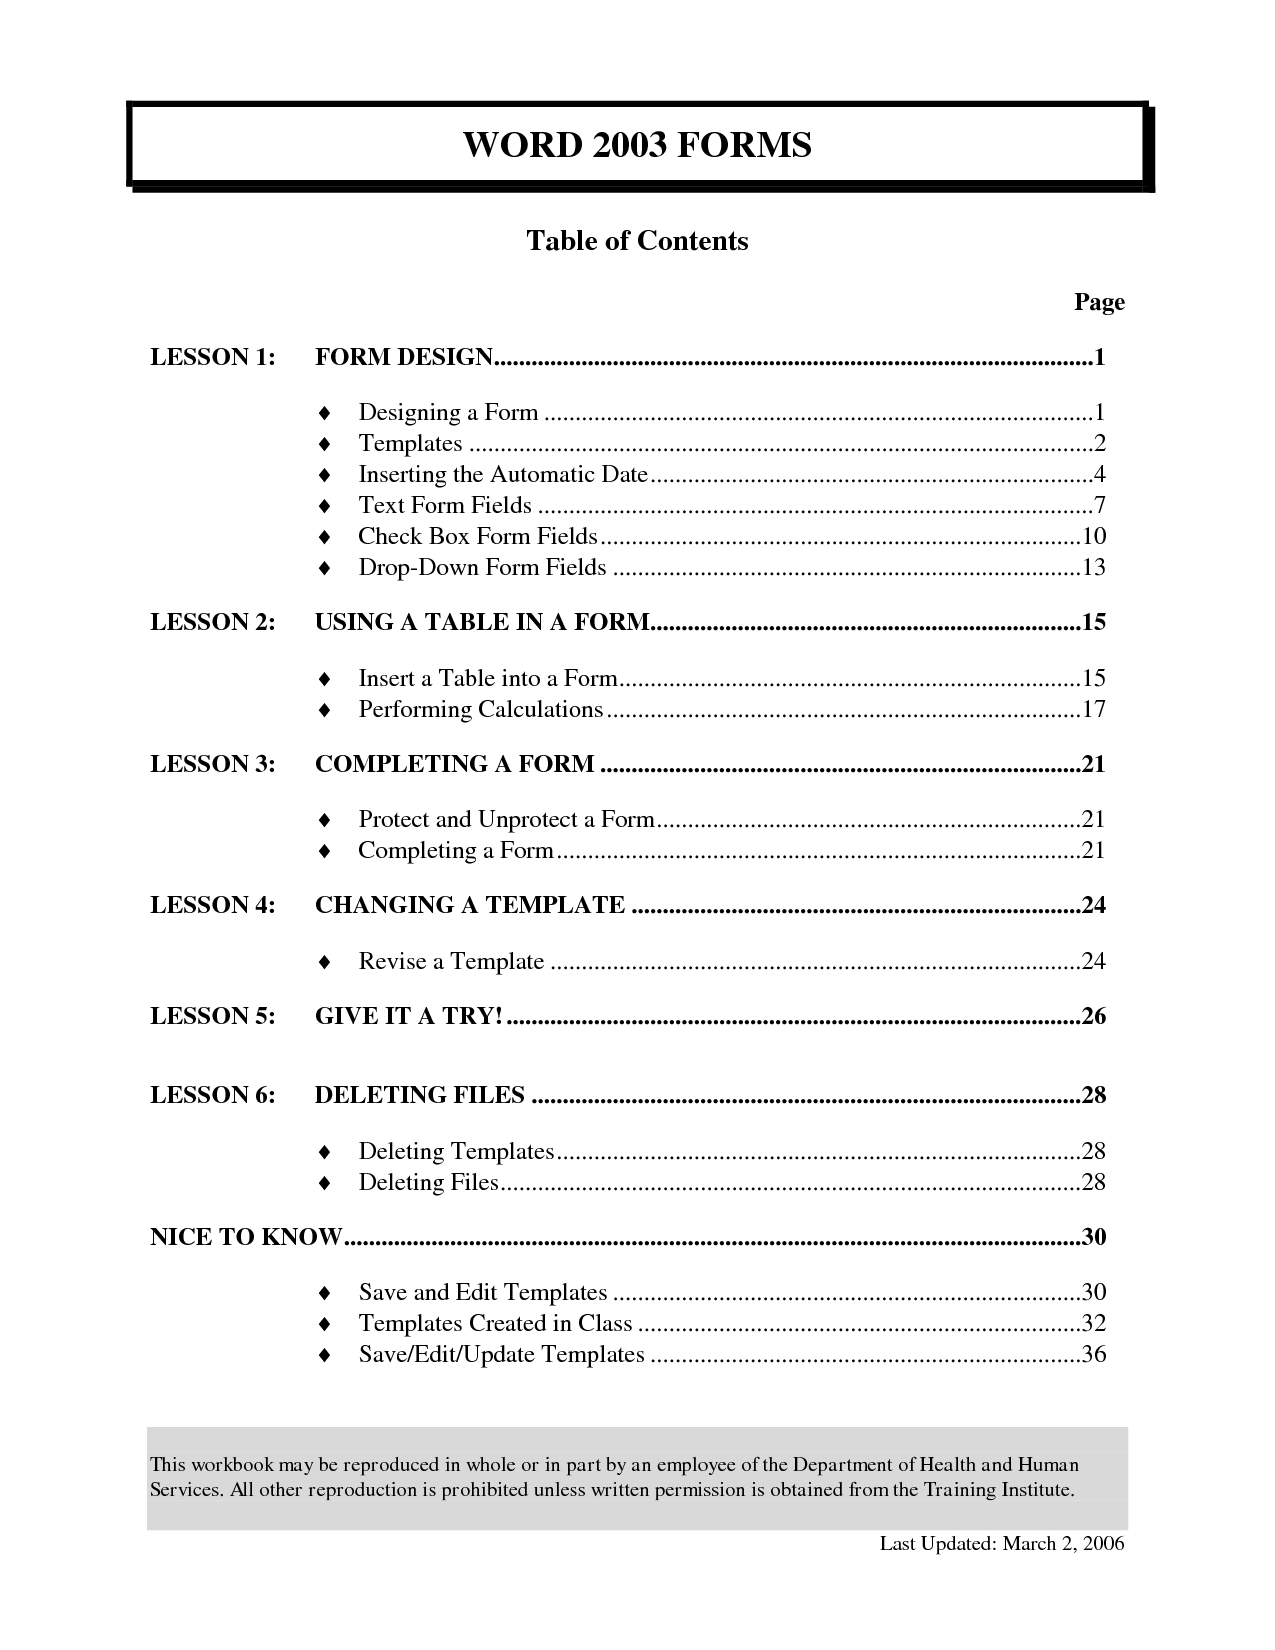 Microsoft Word Table Of Contents Template - Atlantaauctionco Inside Microsoft Word Table Of Contents Template